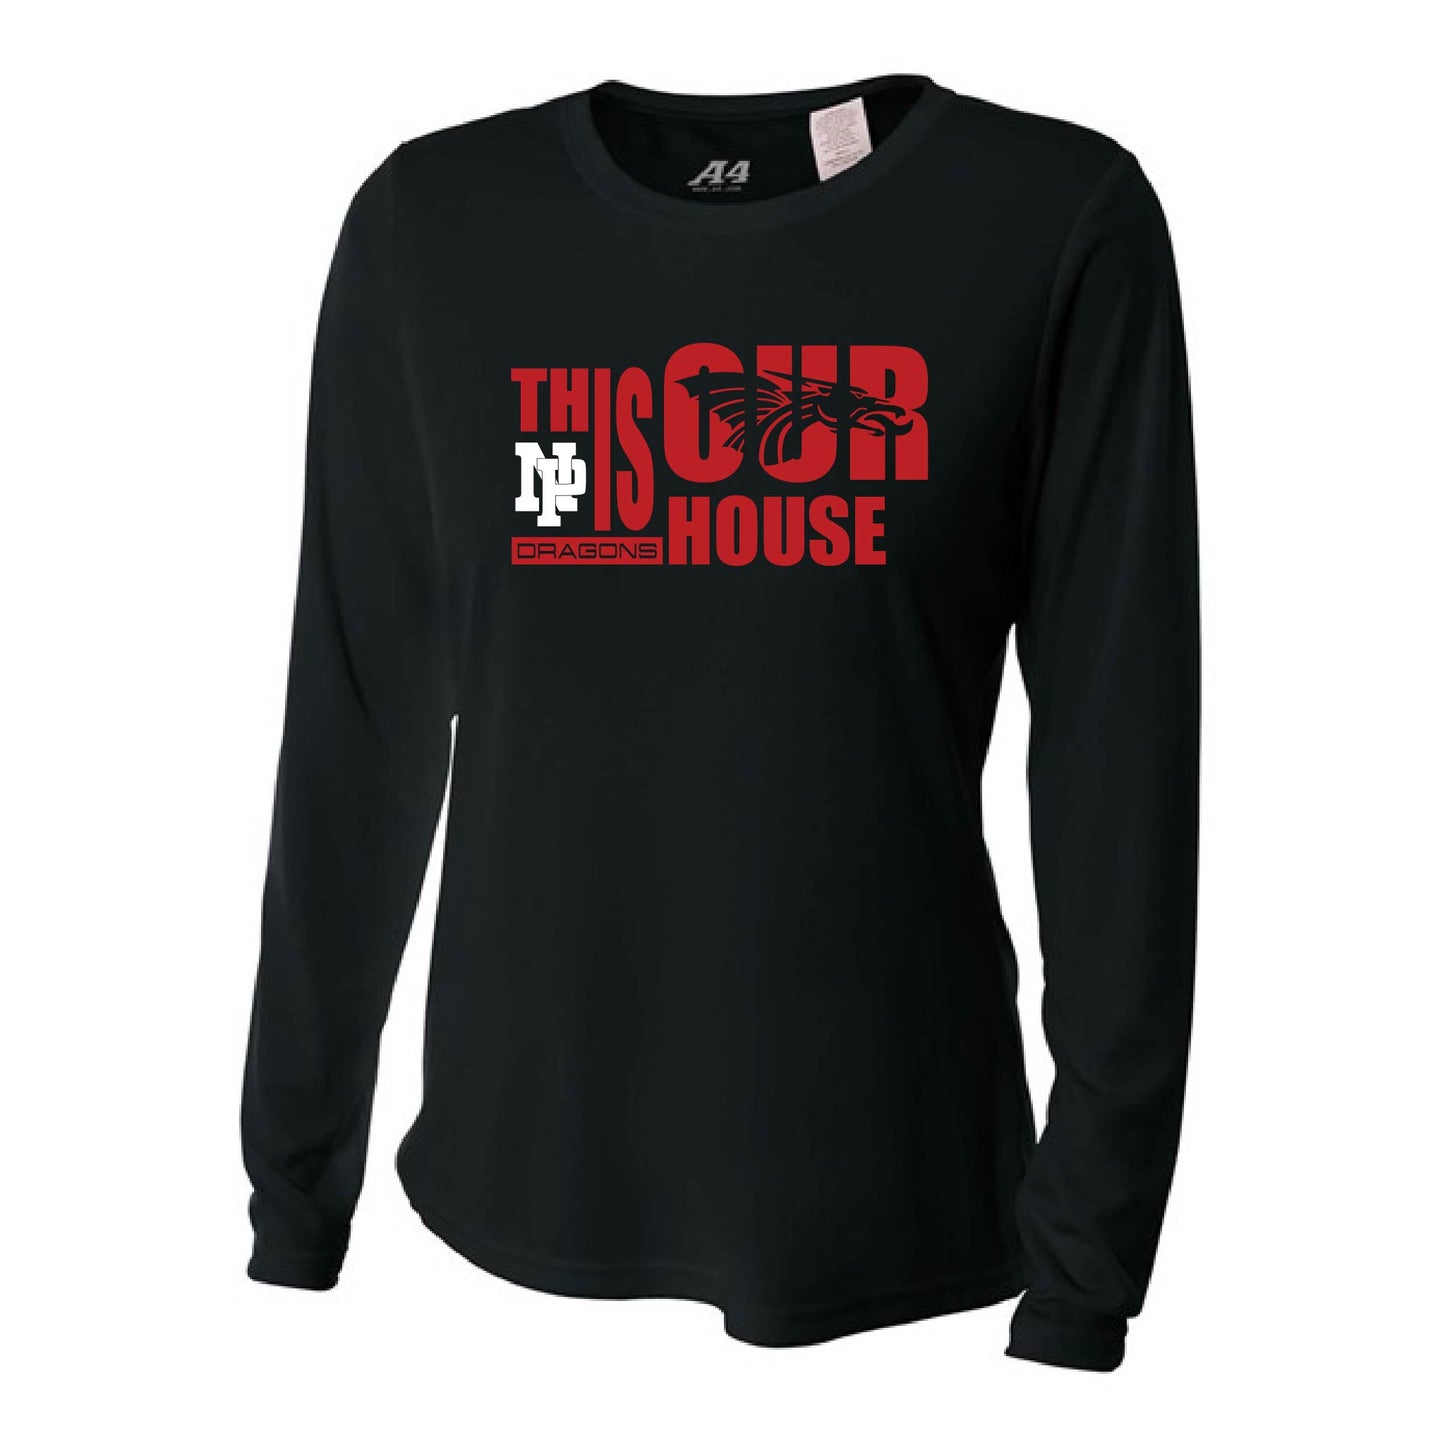 Womens L/S T-Shirt - Our House